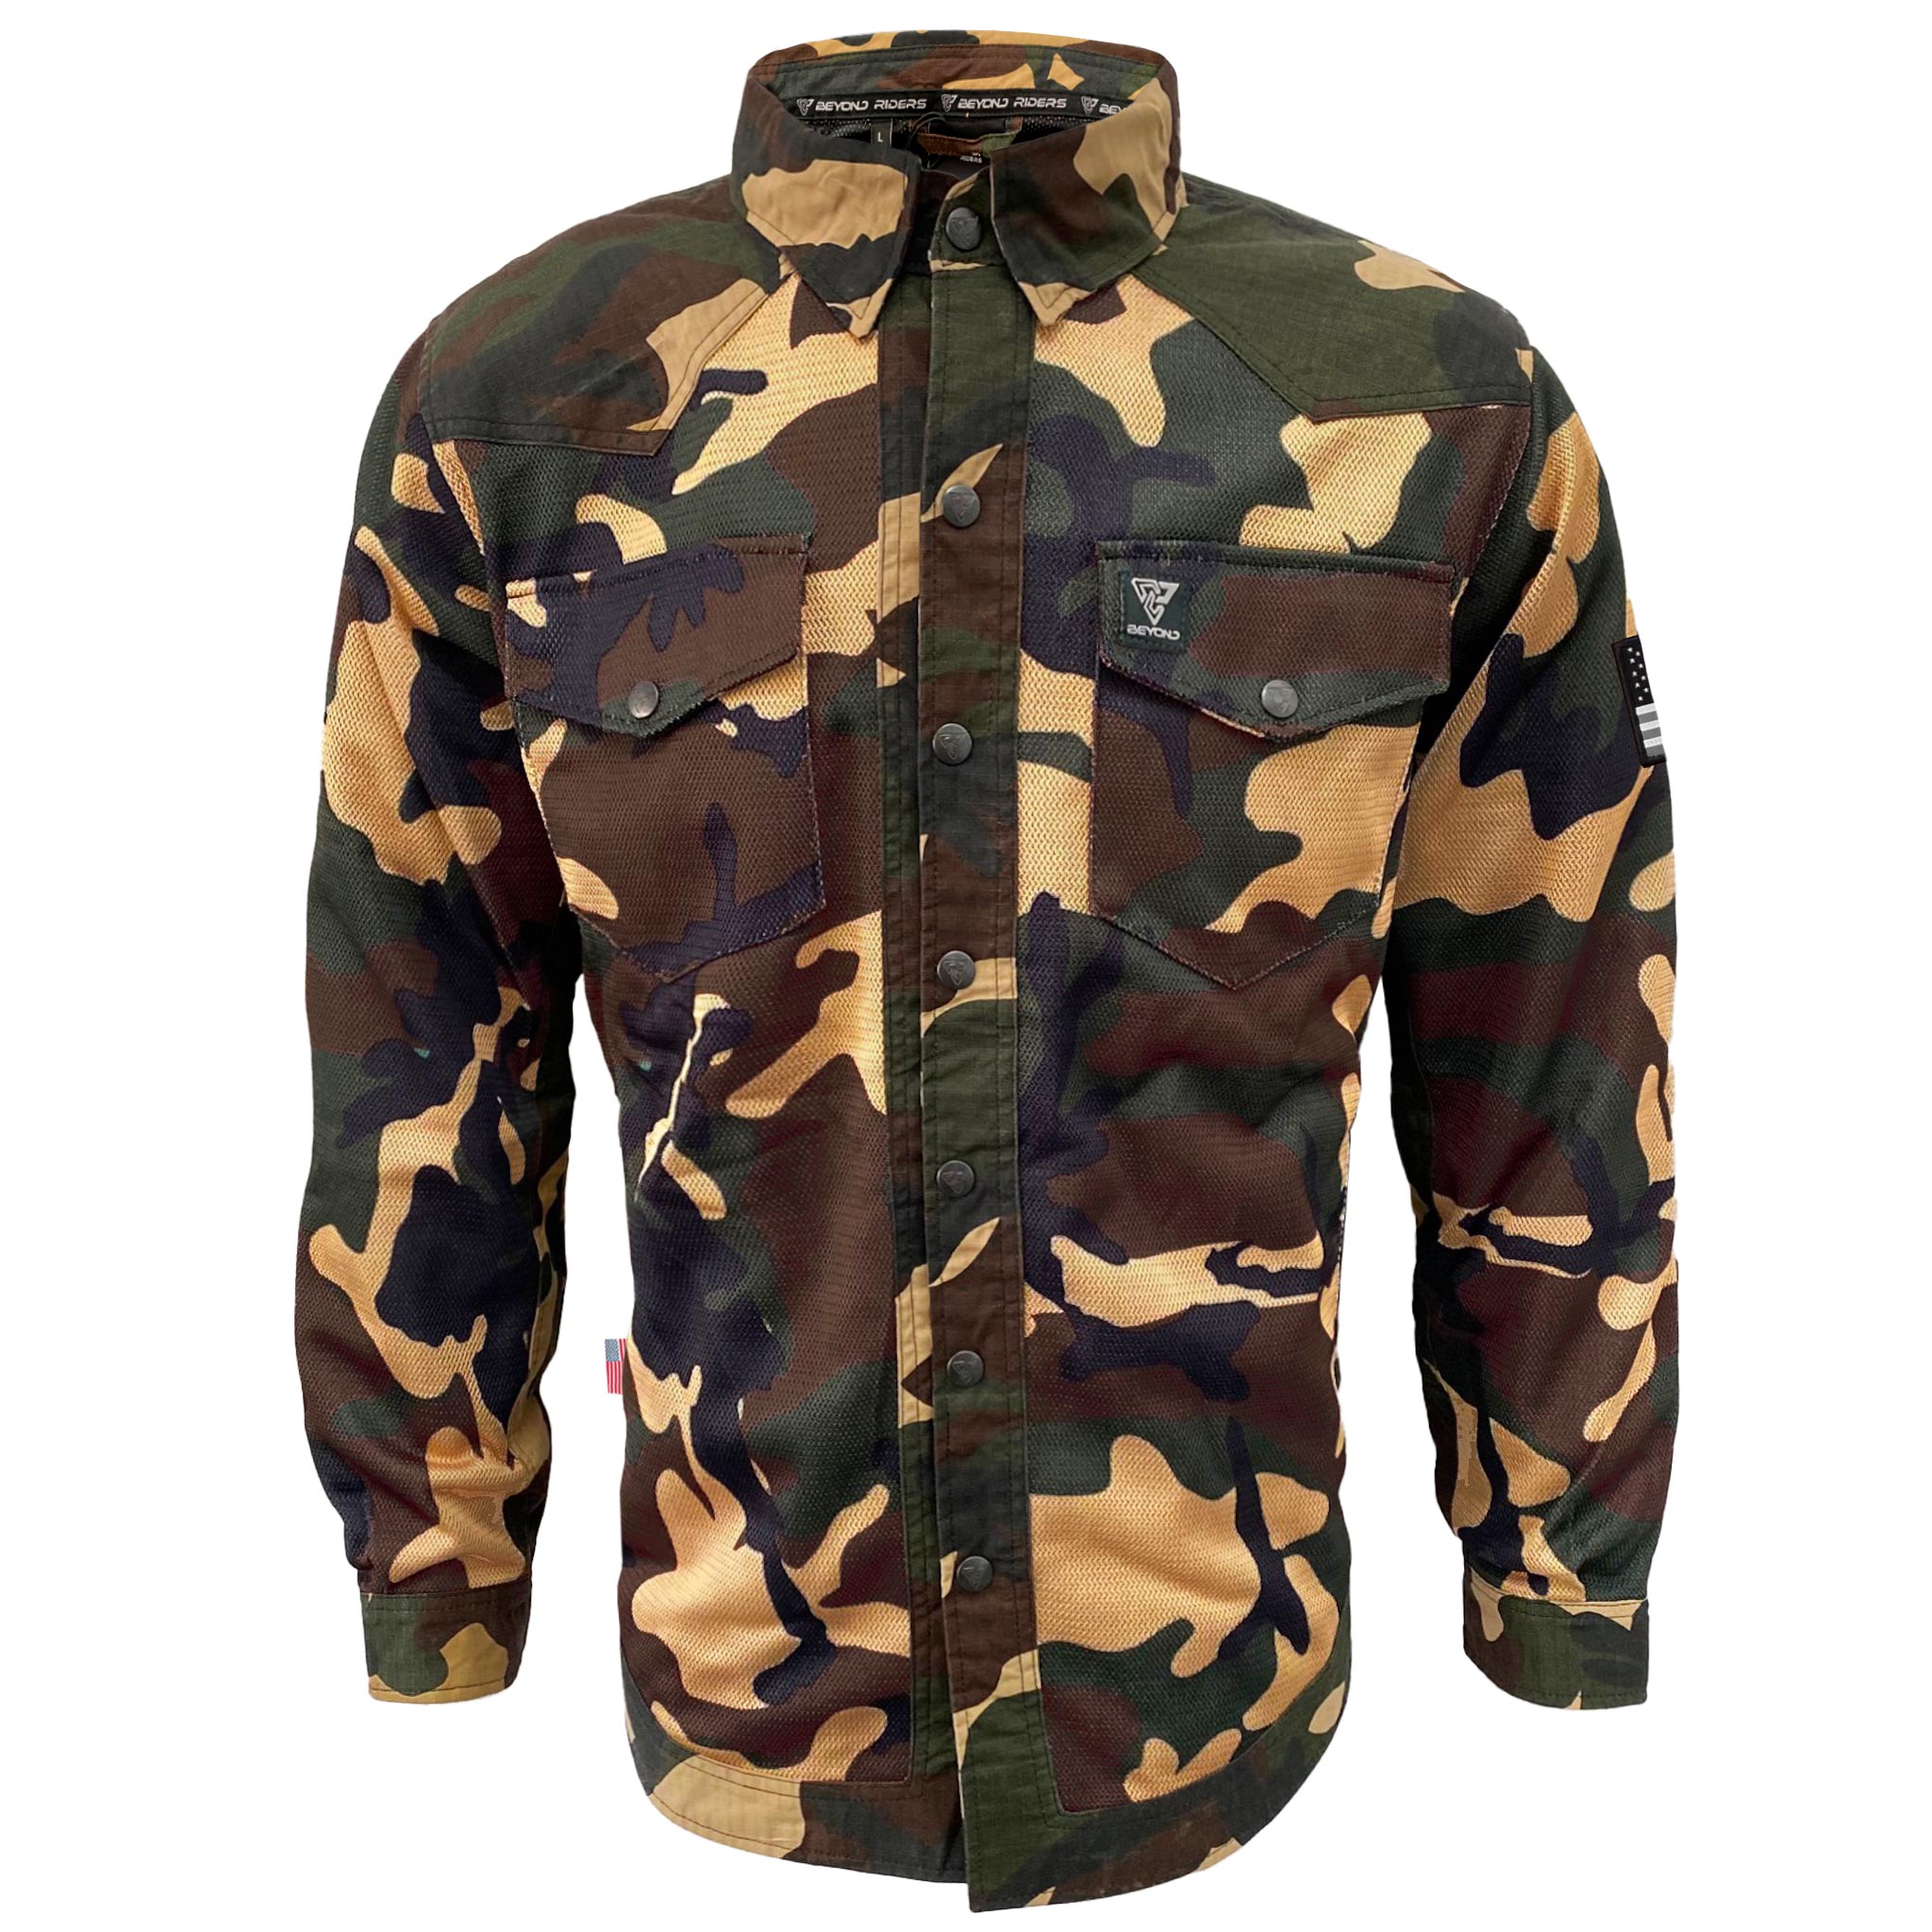 Protective Camouflage Shirt 